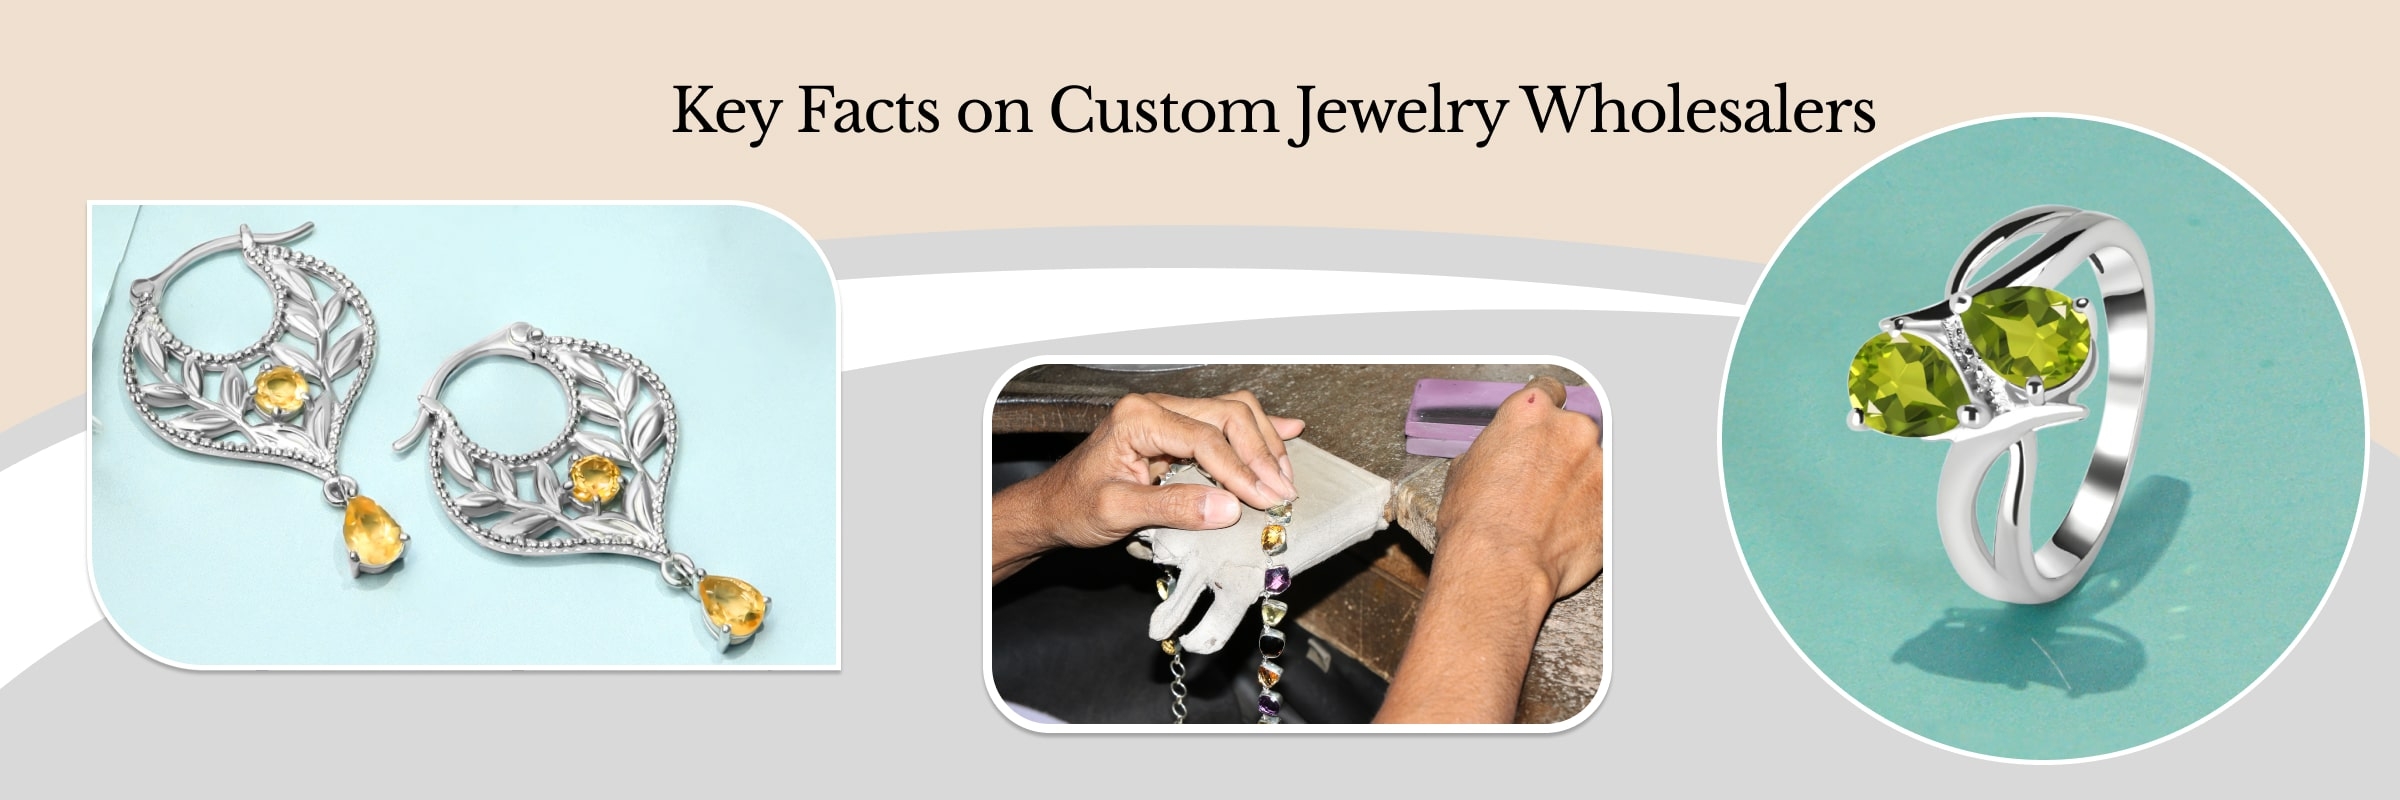 Things to Remember About Custom-Made Jewelry Wholesalers